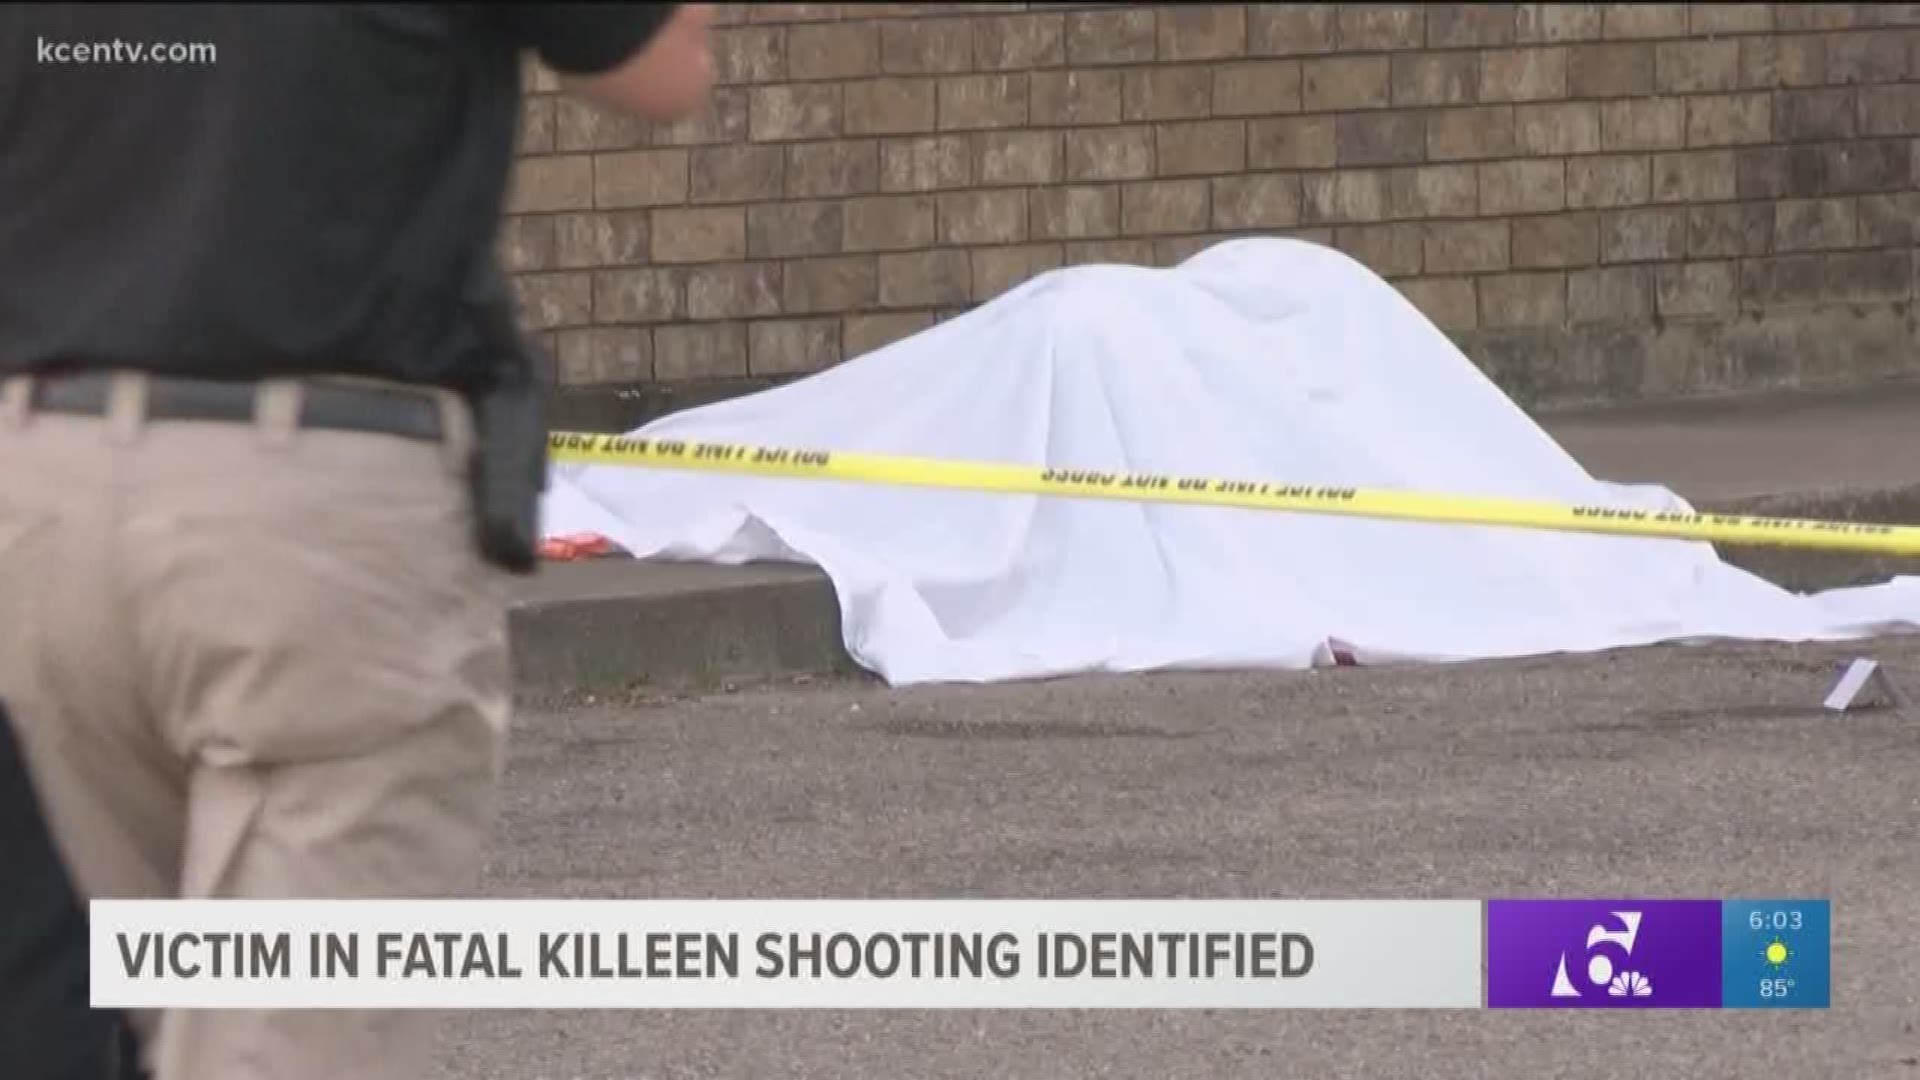 Killeen police have identified the victim in last night's fatal shooting in Killeen. 